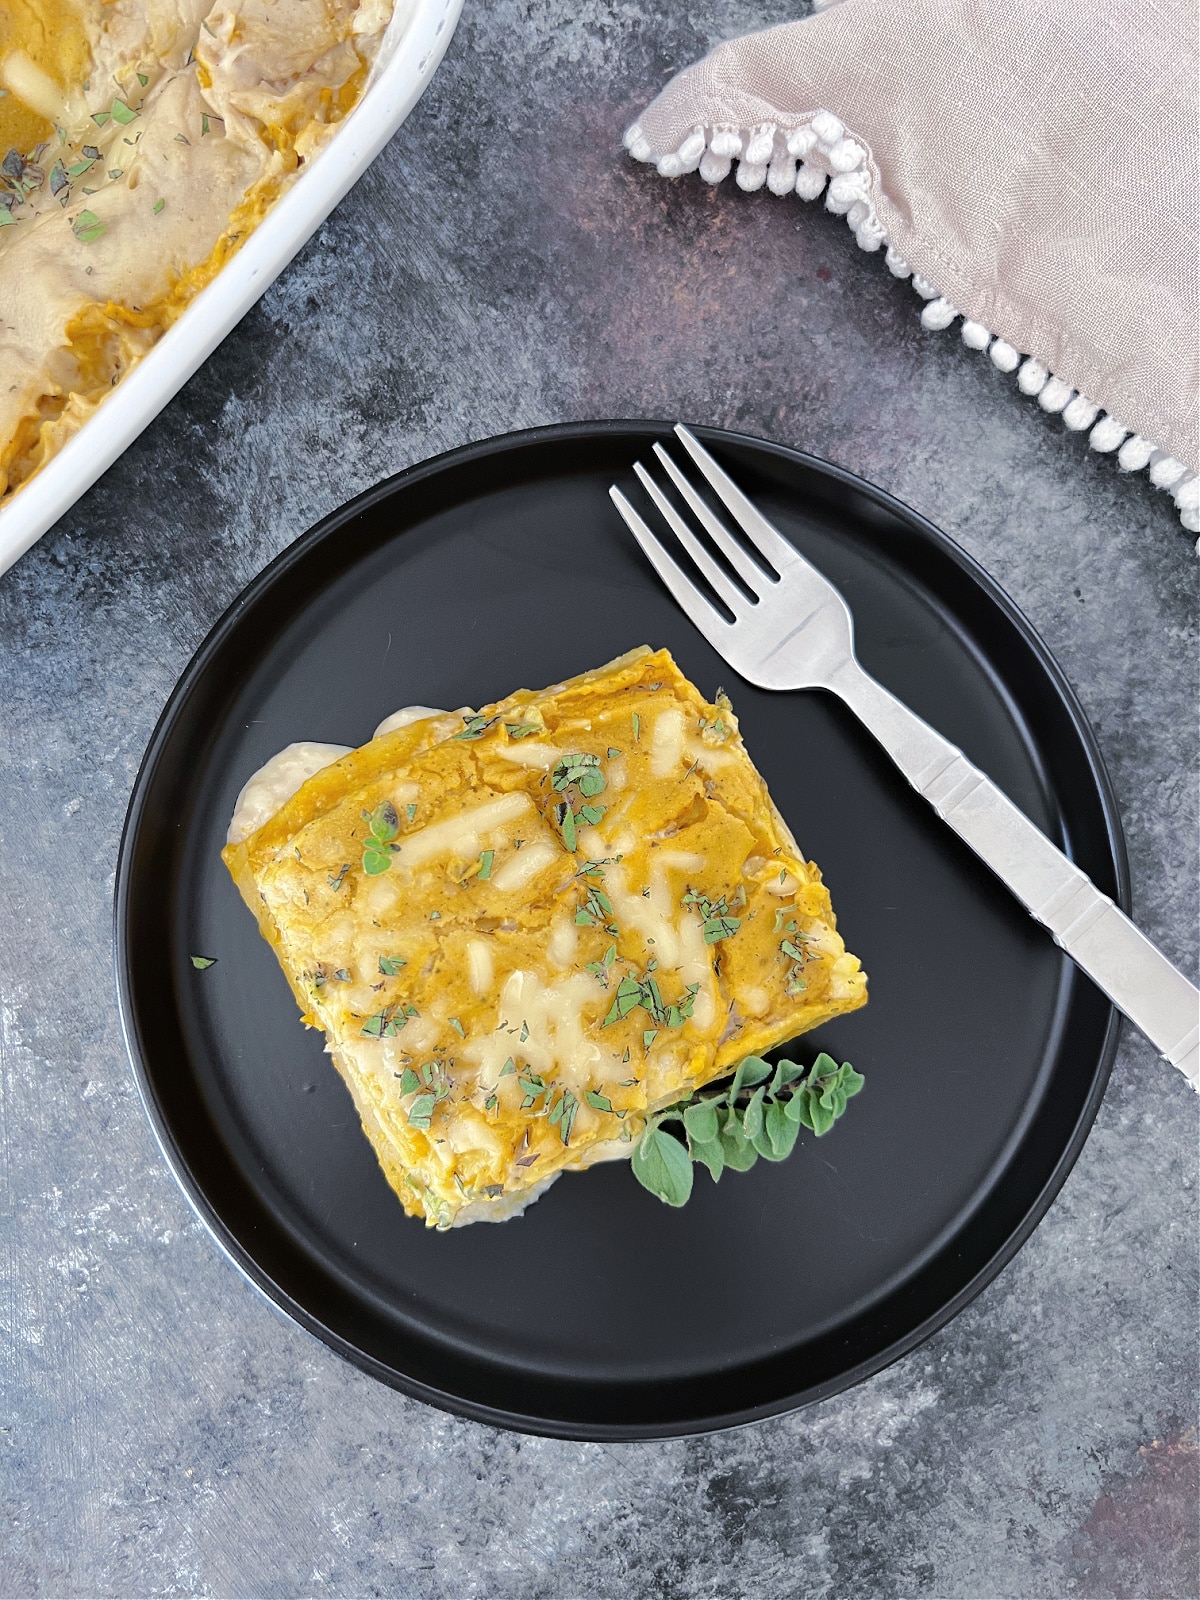 Overhead view of one serving of butternut sage lasagna on a matte black plate, with the white ceramic baking dish of lasagna blurred in the background. Lasagna is garnished with chopped fresh oregano and one whole sprig of oregano.